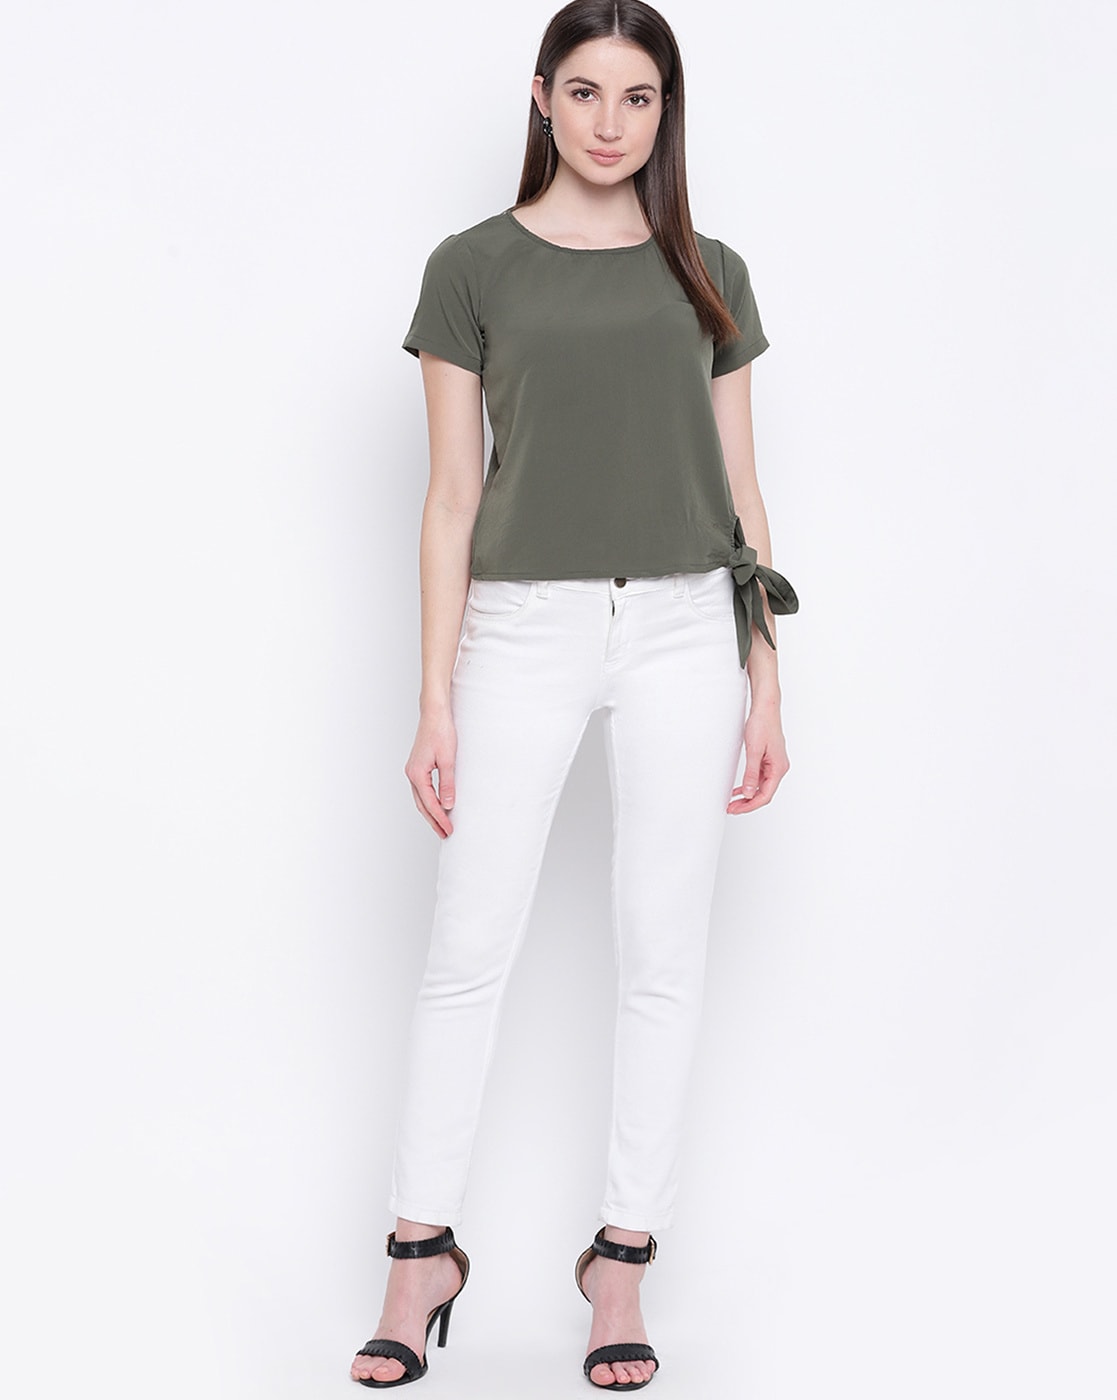 Buy Sea Green Tops for Women by Mayra Online